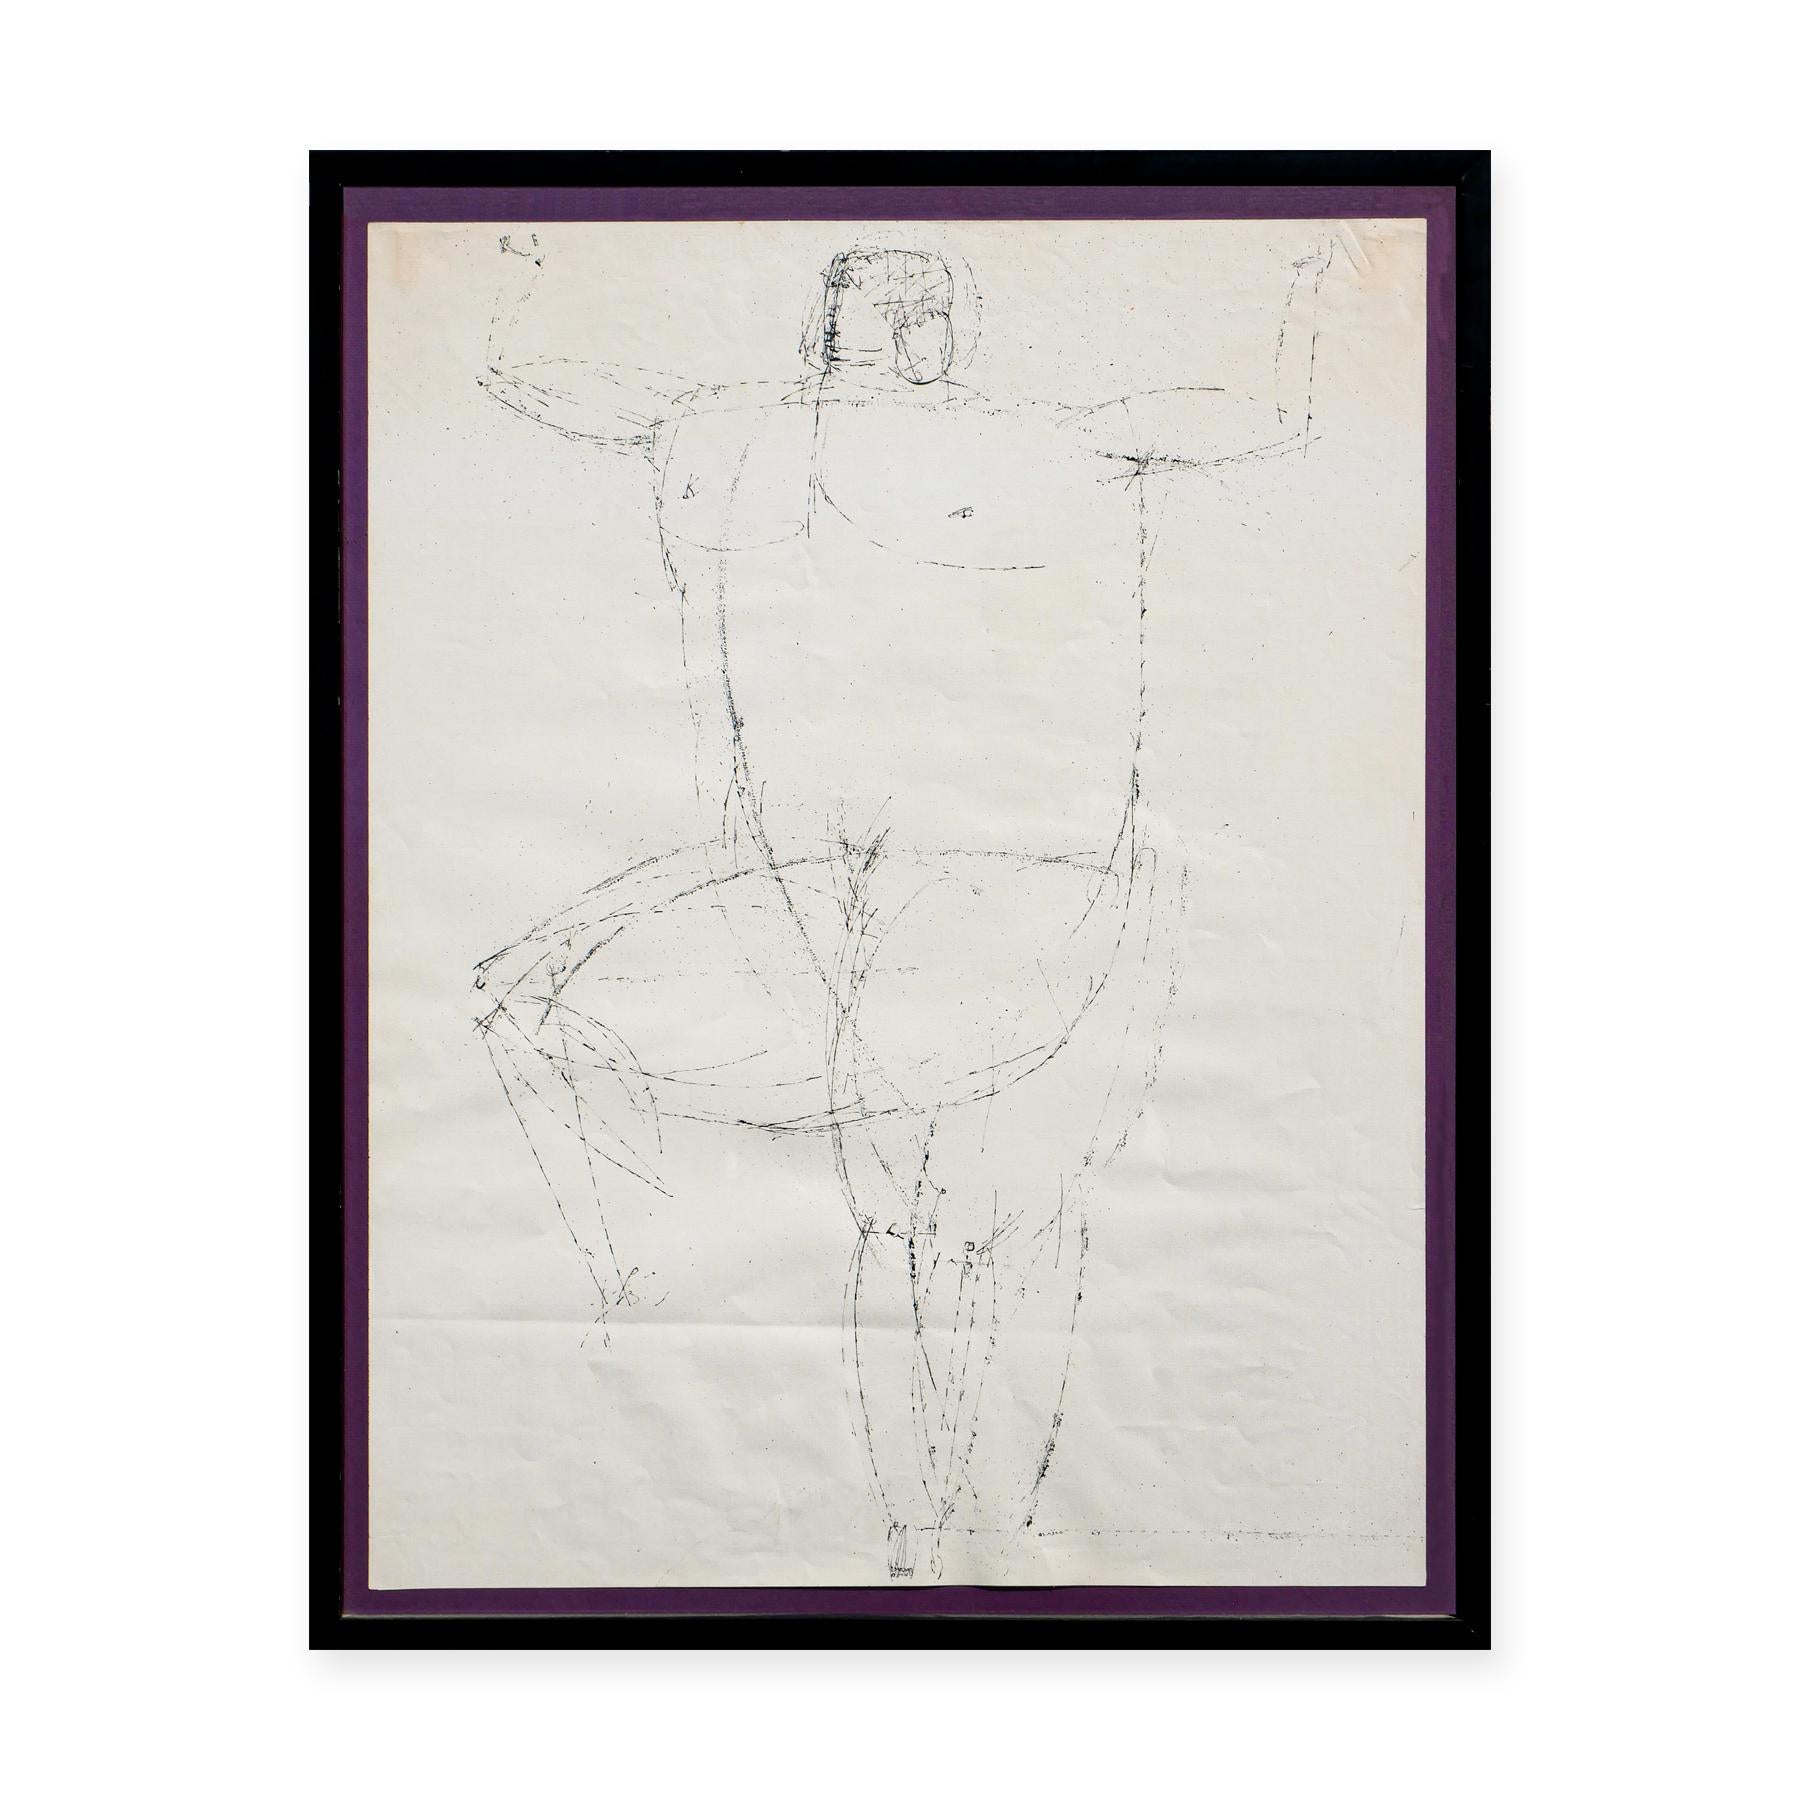 “Standing Man (One Leg Raised)” Monochromatic Abstract Figurative Ink Drawing - Abstract Expressionist Art by Joseph Glasco